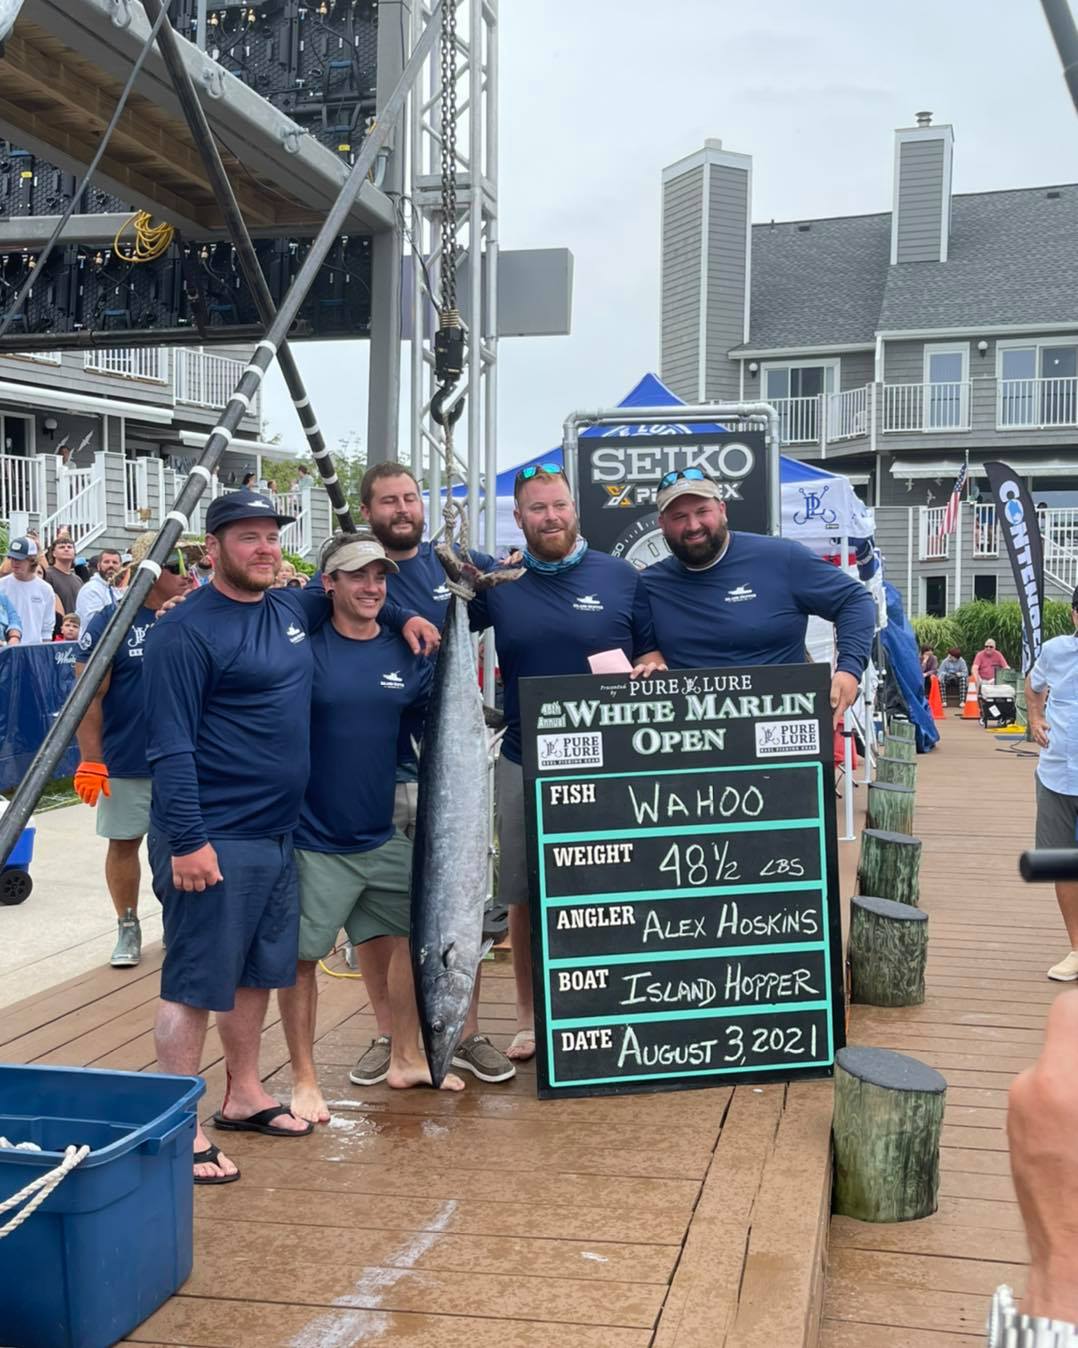 Leaderboard Changes for Day 2 at the 2021 White Marlin Open